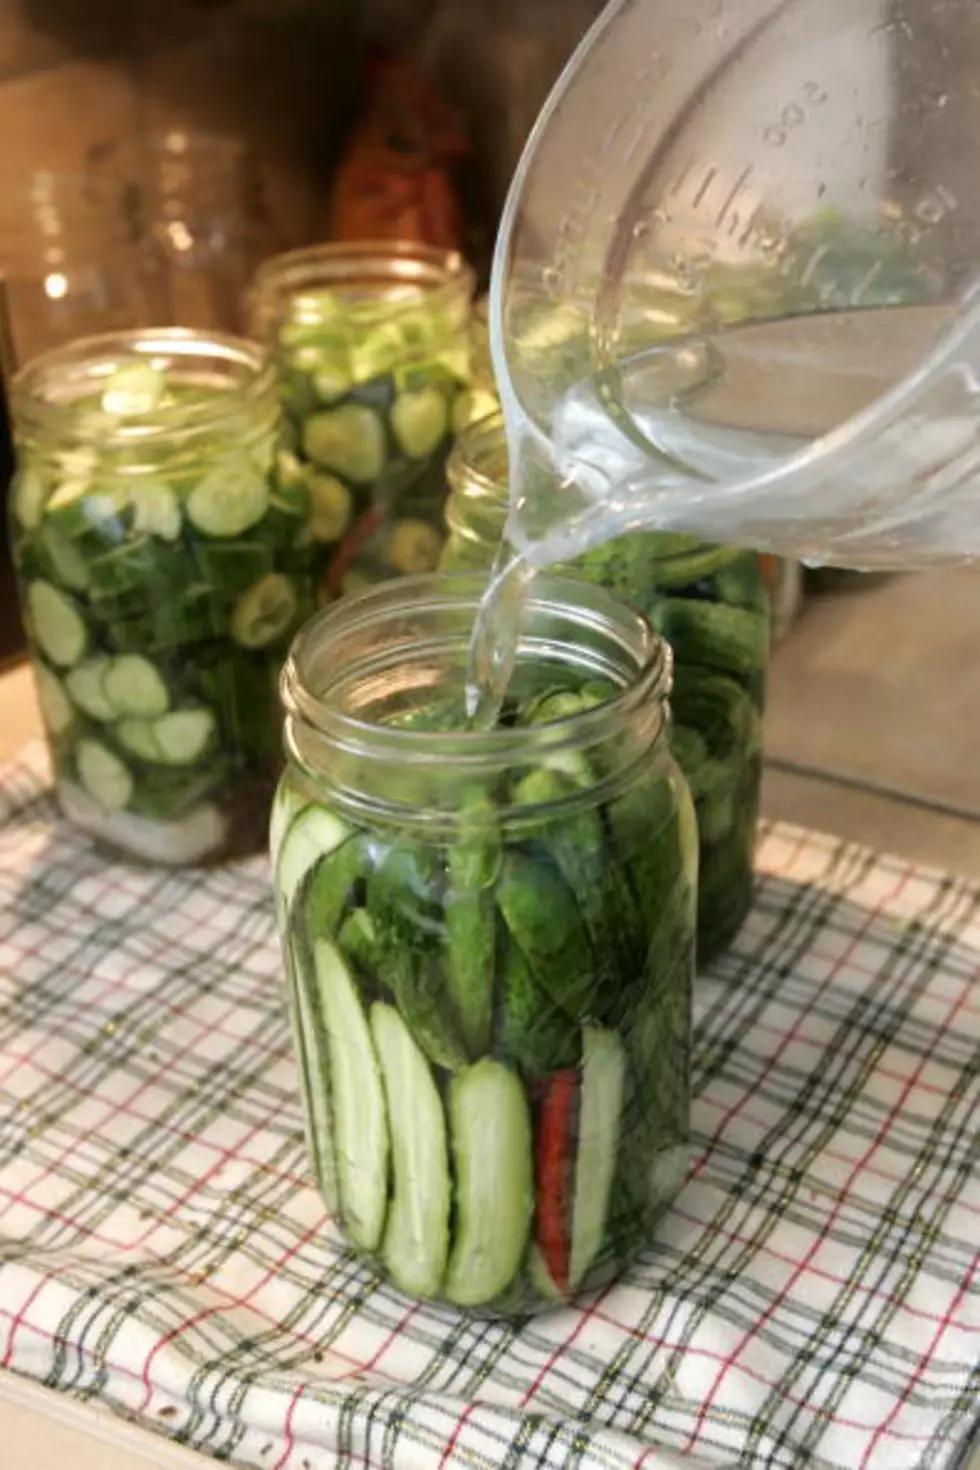 Pickle Power! Got A Summer Sweet Tooth? Dill It And Kill It!